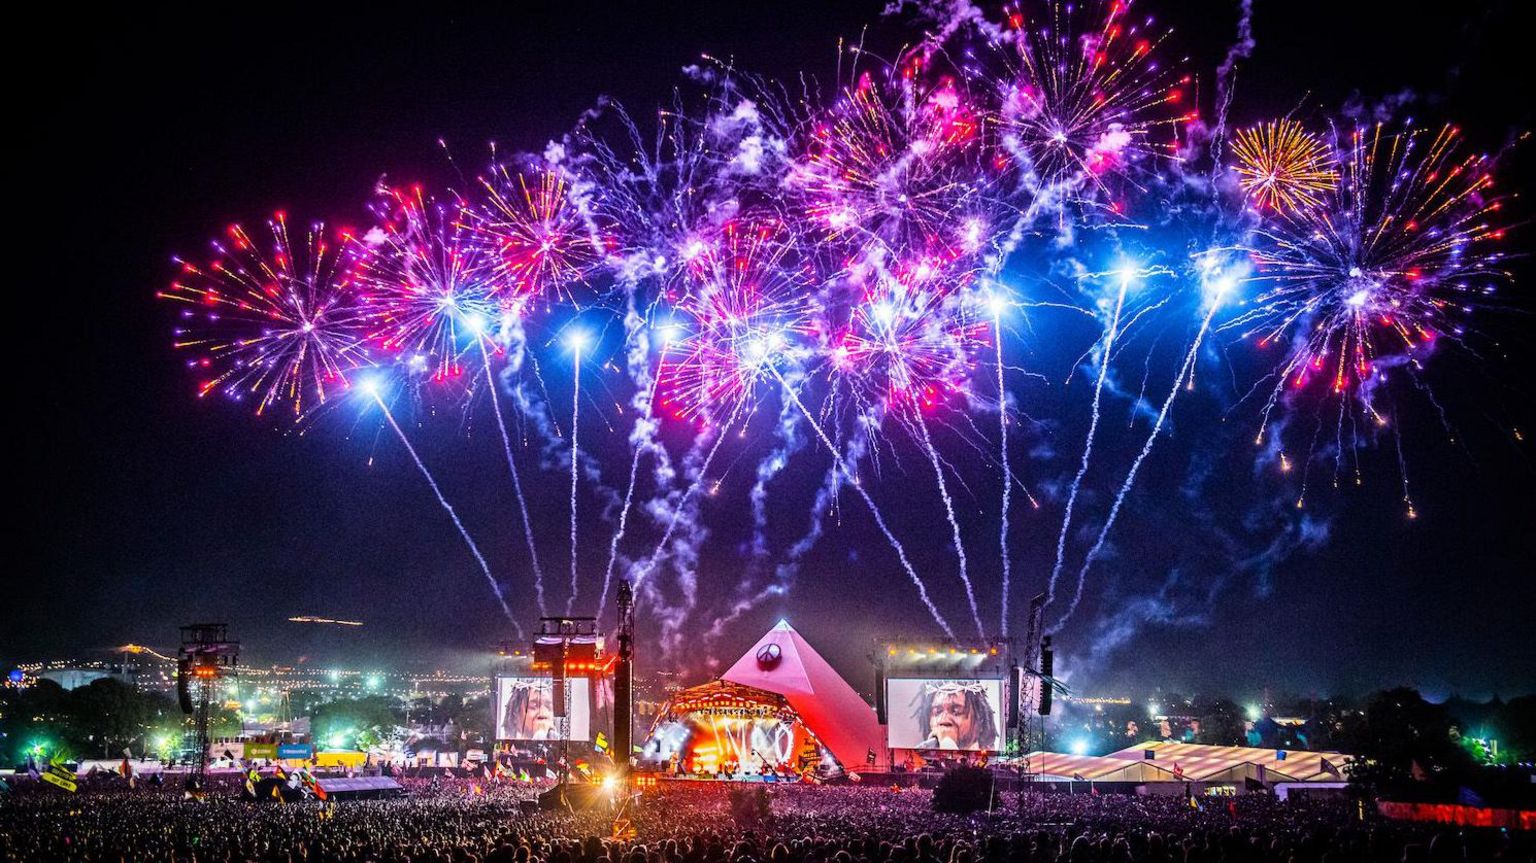 Long shot of the Pyramid Stage, lit up with fireworks